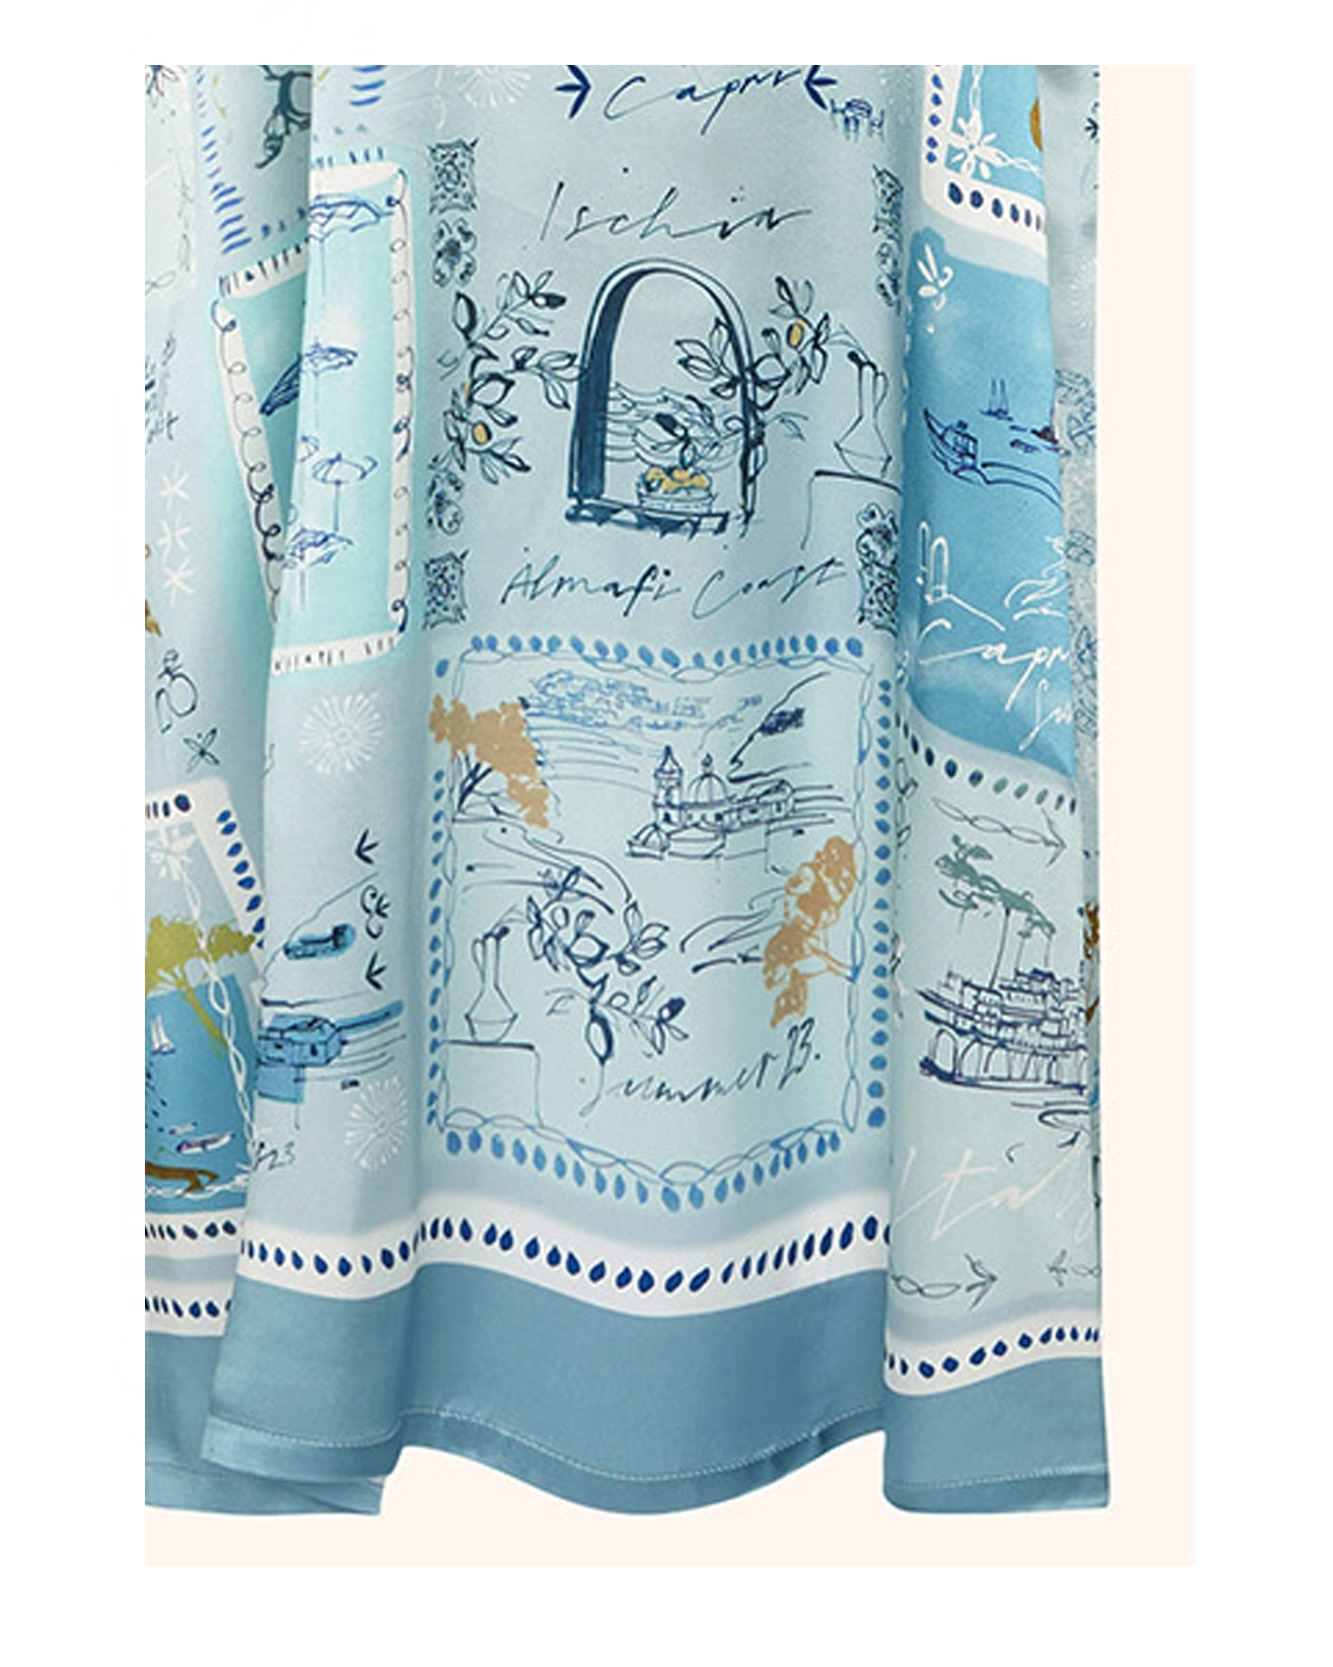 Travel illustration collaboration for Kiton - SS24 Resort Collection. A collection inspired by Naples & The Amalfi Coast.